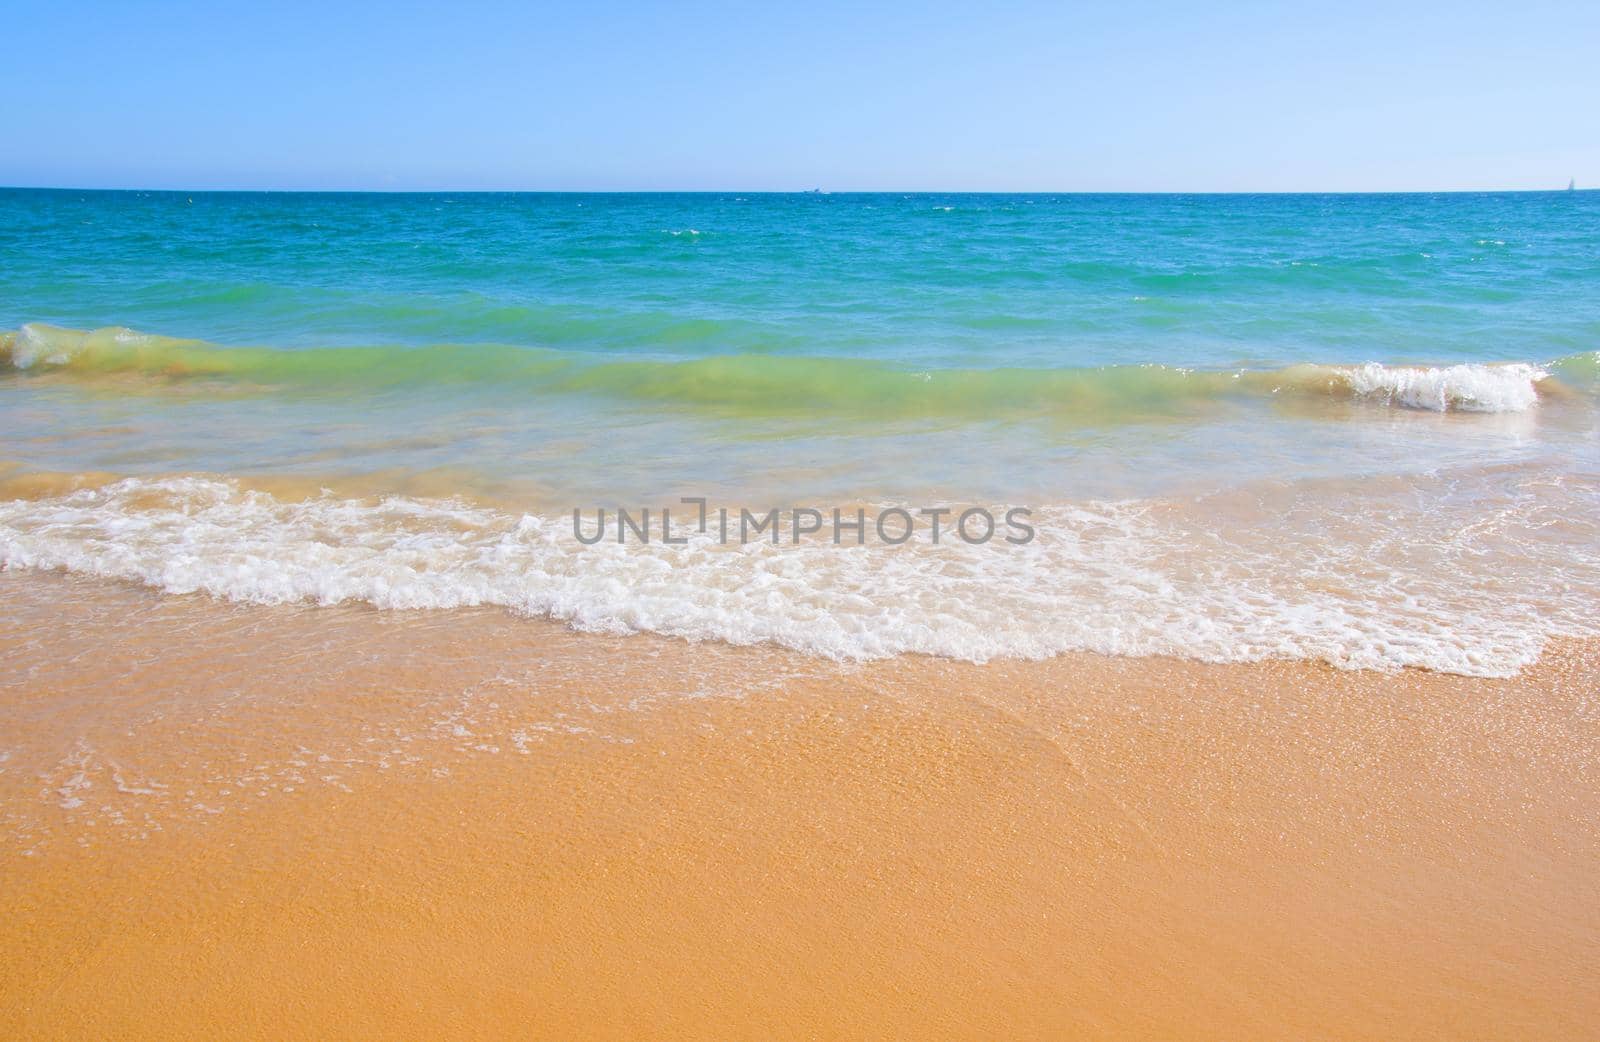 Ocean shore with yellow sand, blue water and waves, summer, Portugal